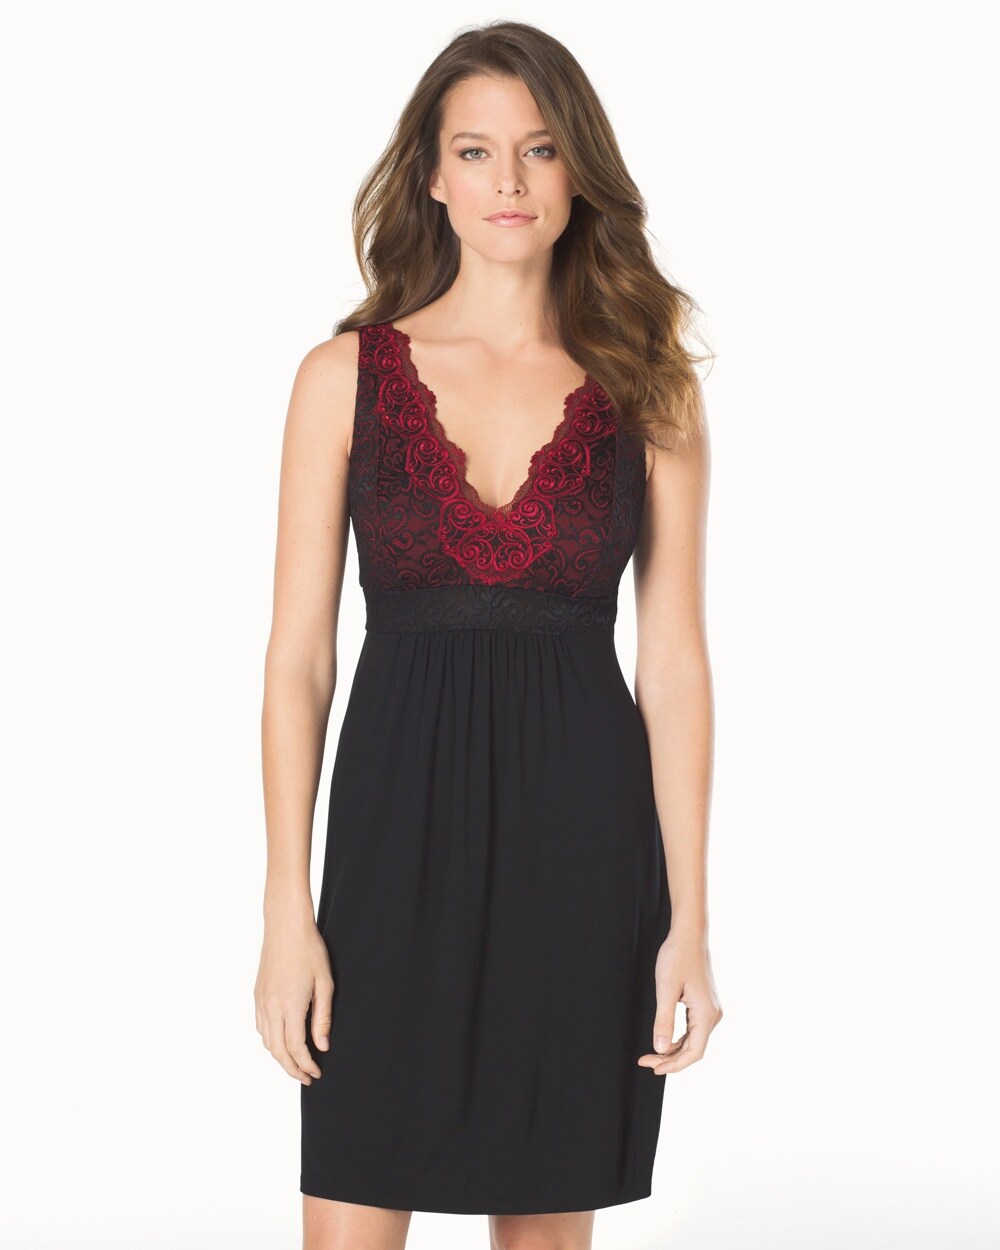 Limited Edition Sensuous Scroll Sleep Chemise Black With Ruby Lace